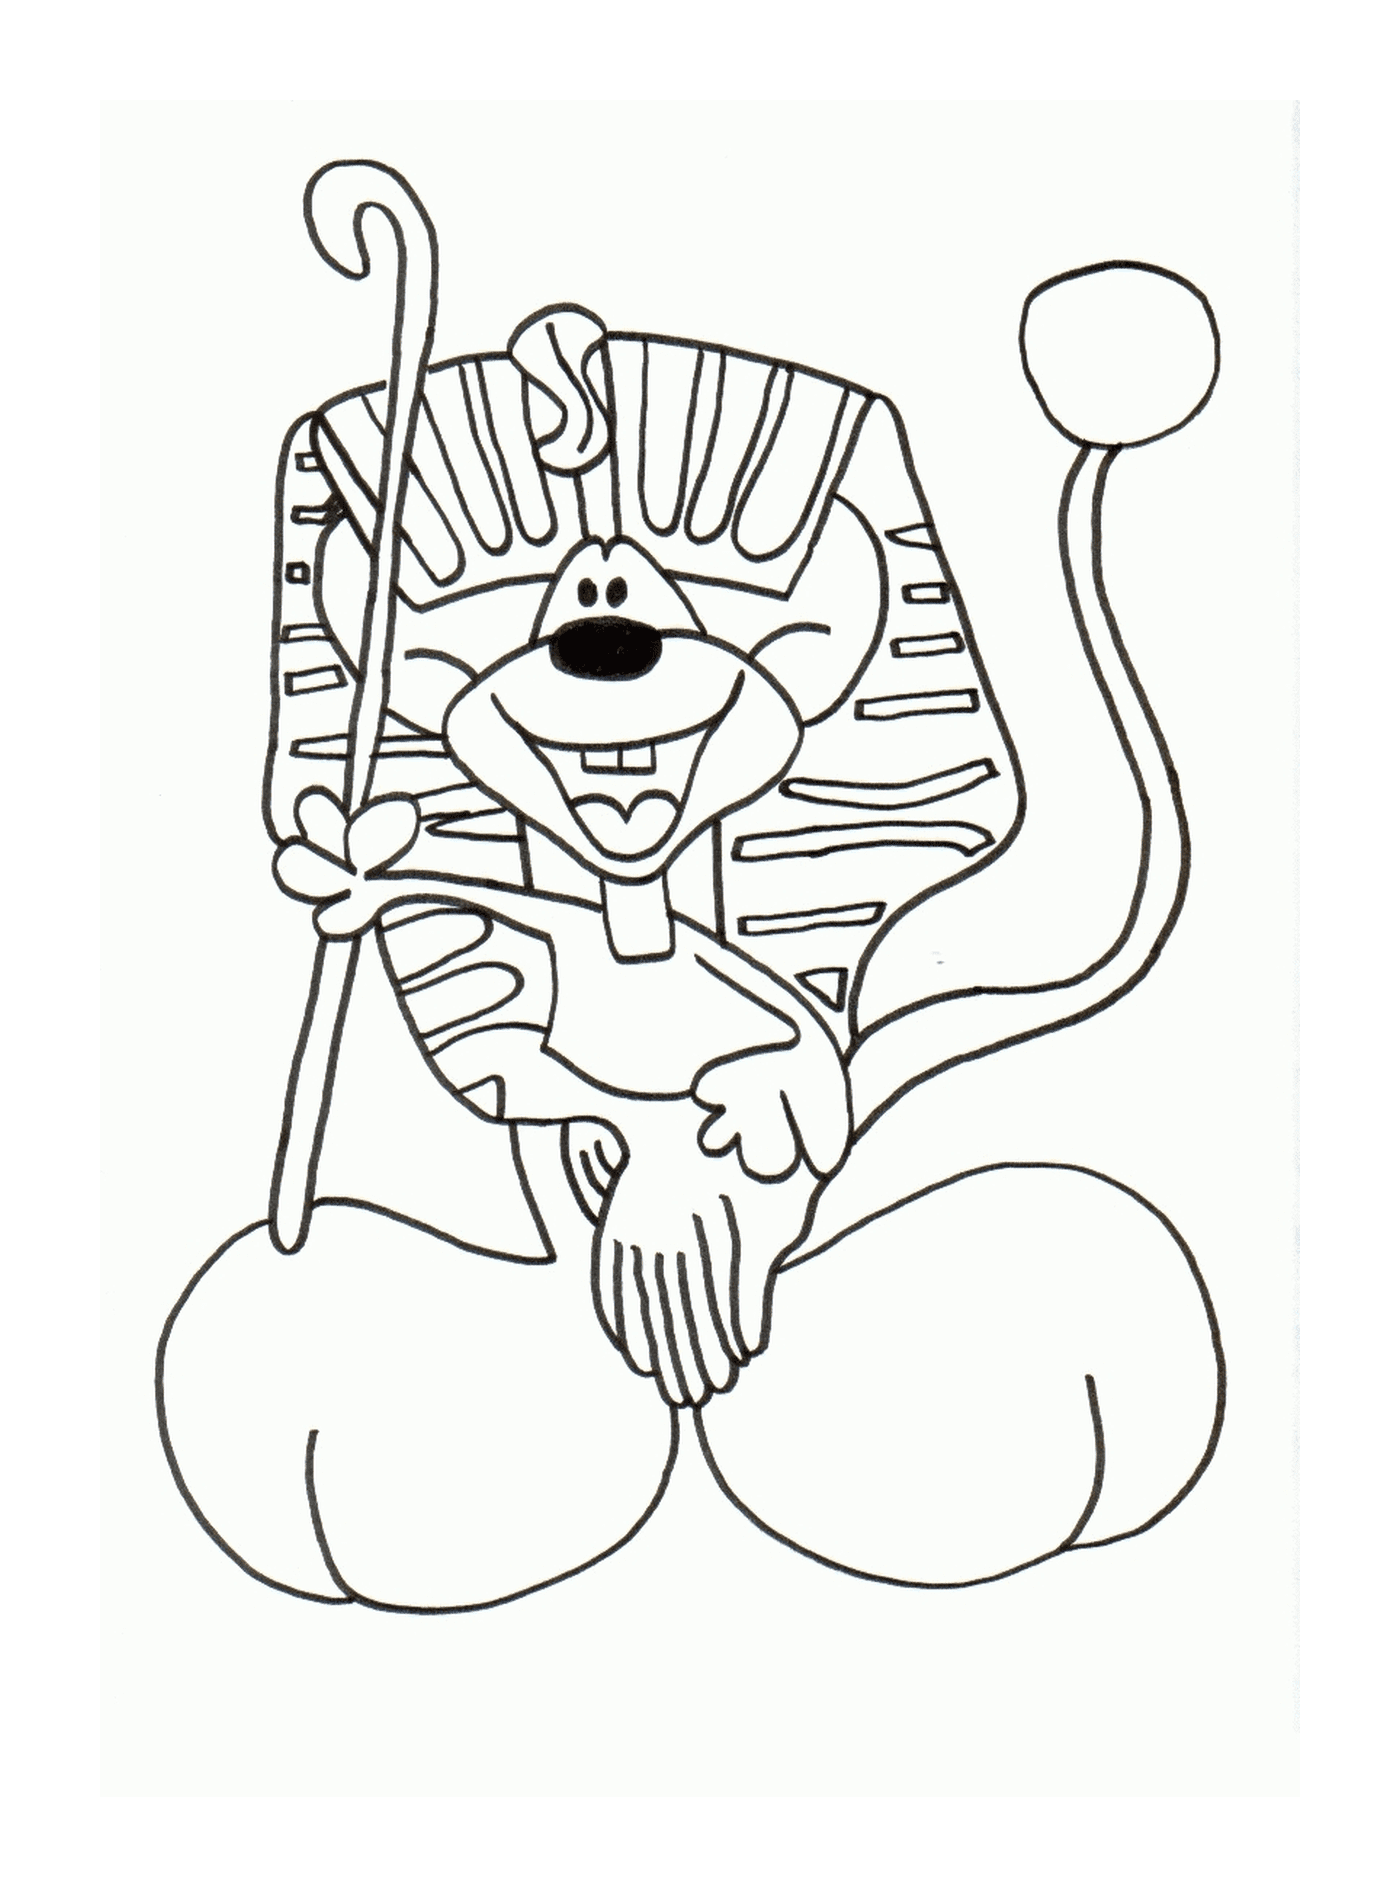  A cat disguised as a pharaoh 